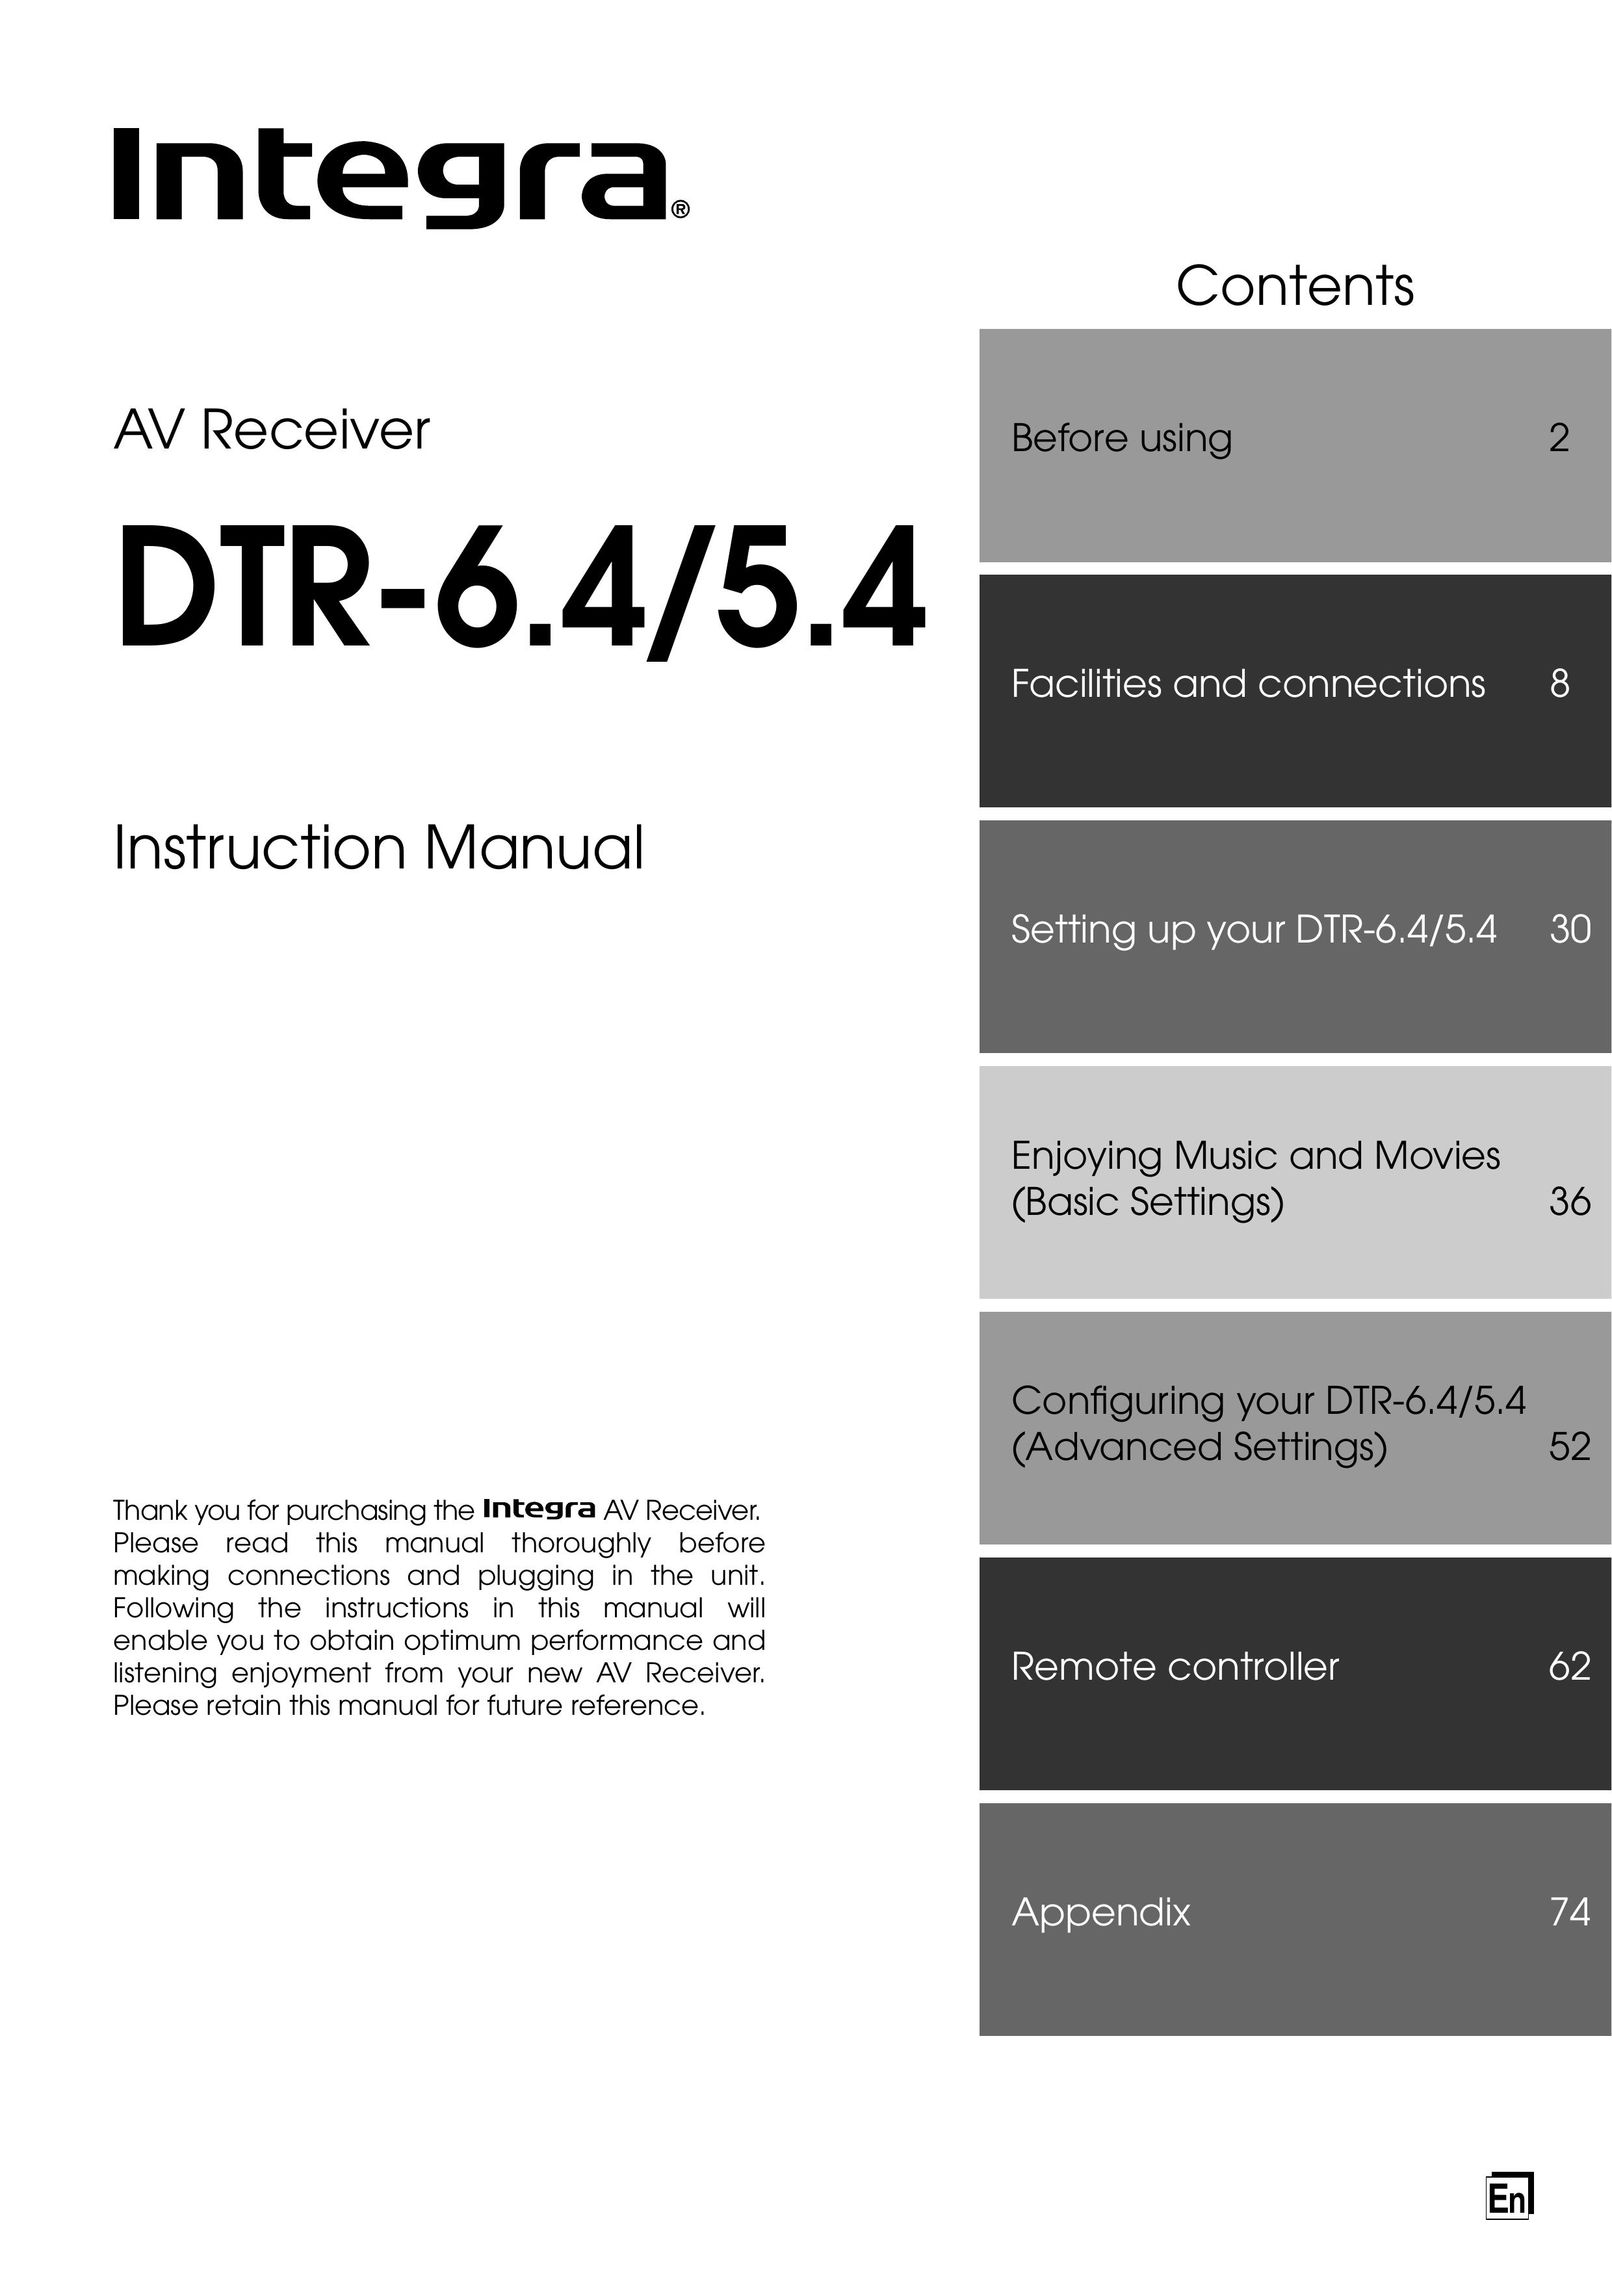 Integra DTR-6.4/5.4 Stereo Receiver User Manual (Page 1)